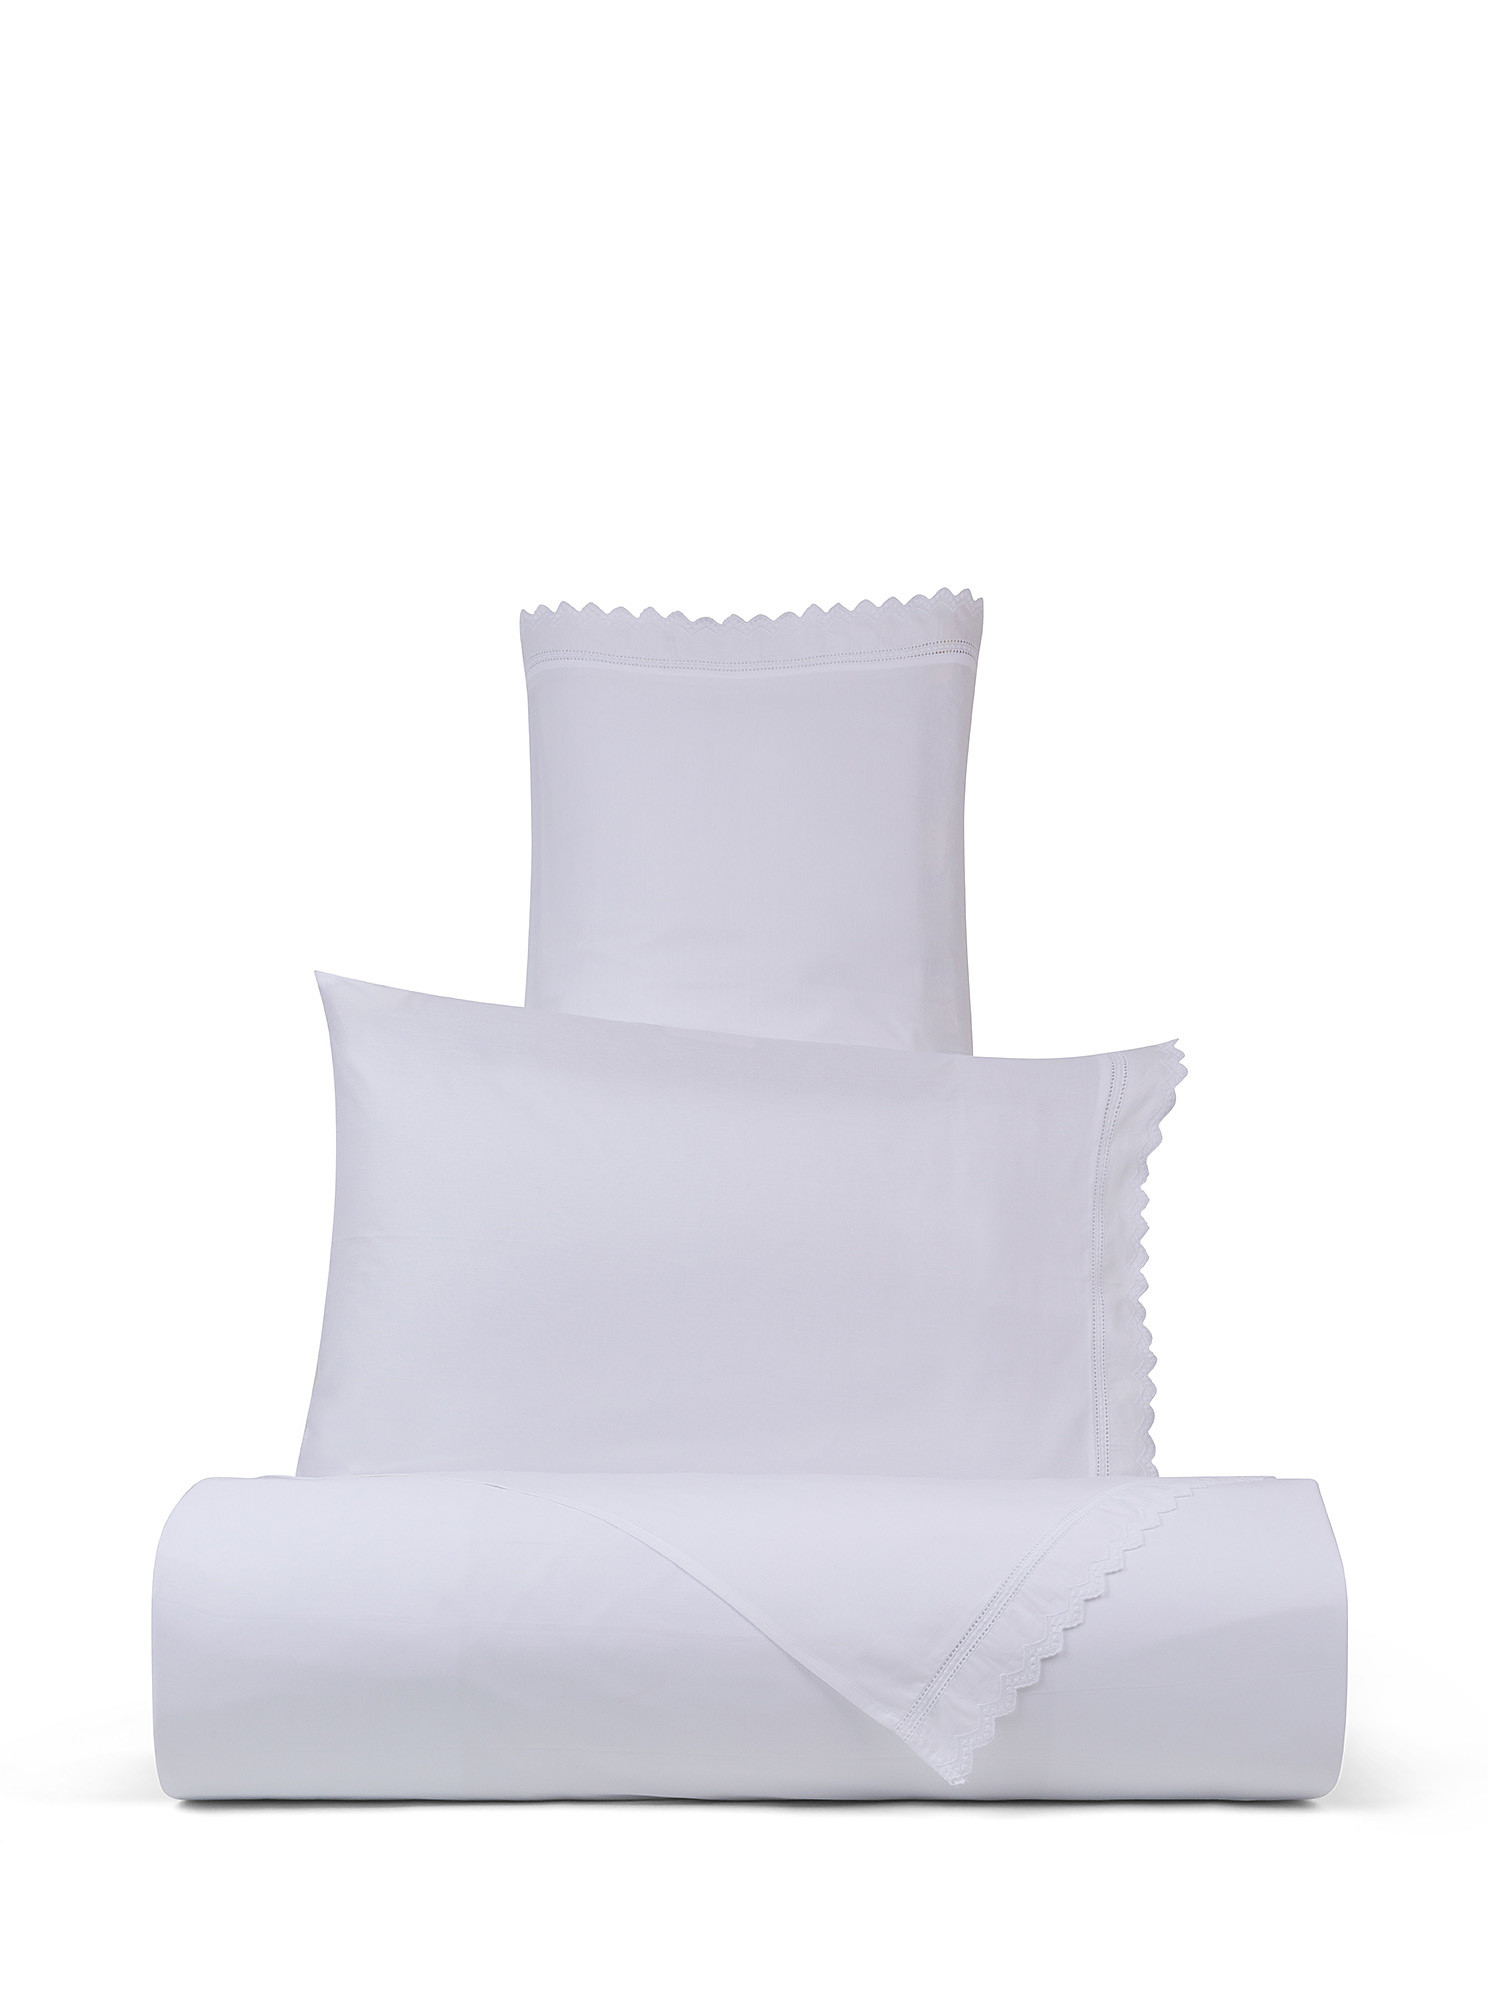 Cotton percale sheet set with broderie anglaise embroidery, White, large image number 0